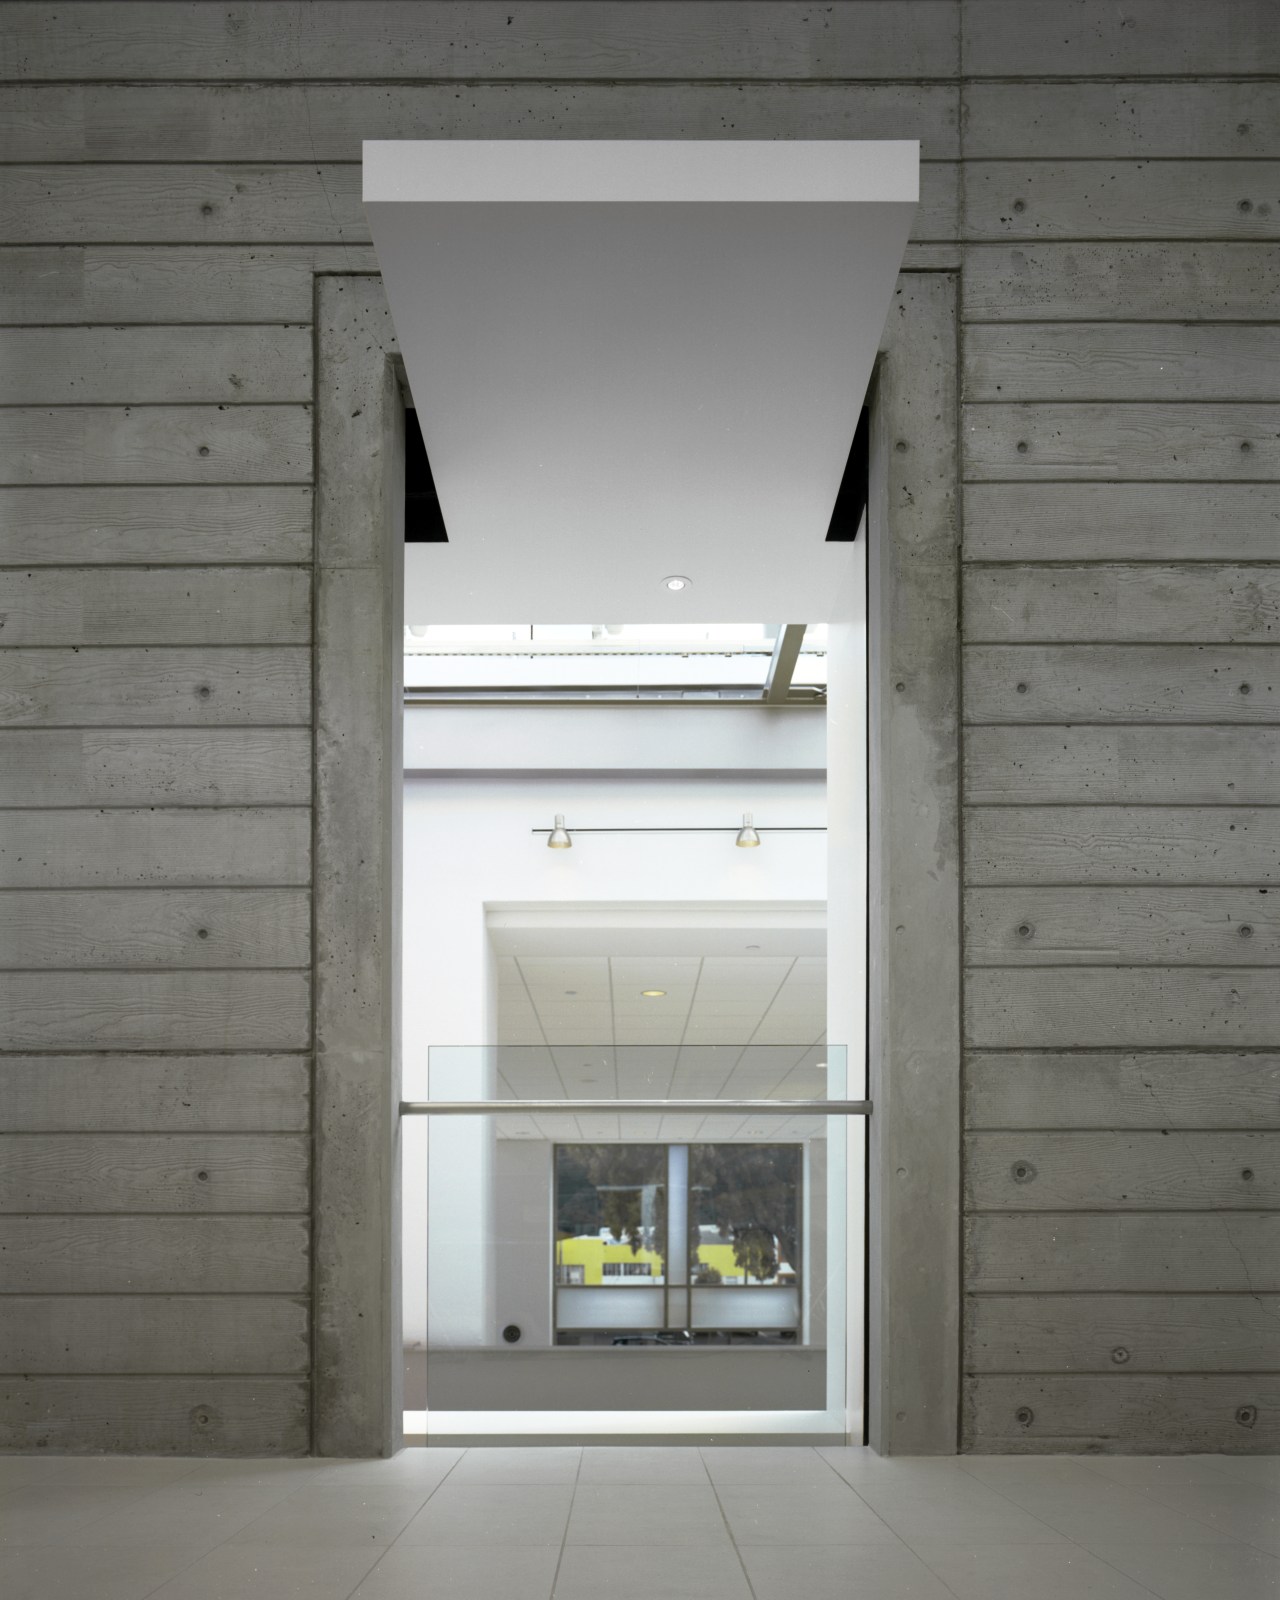 A concrete projection draws attention to an opening architecture, daylighting, door, facade, home, house, window, gray